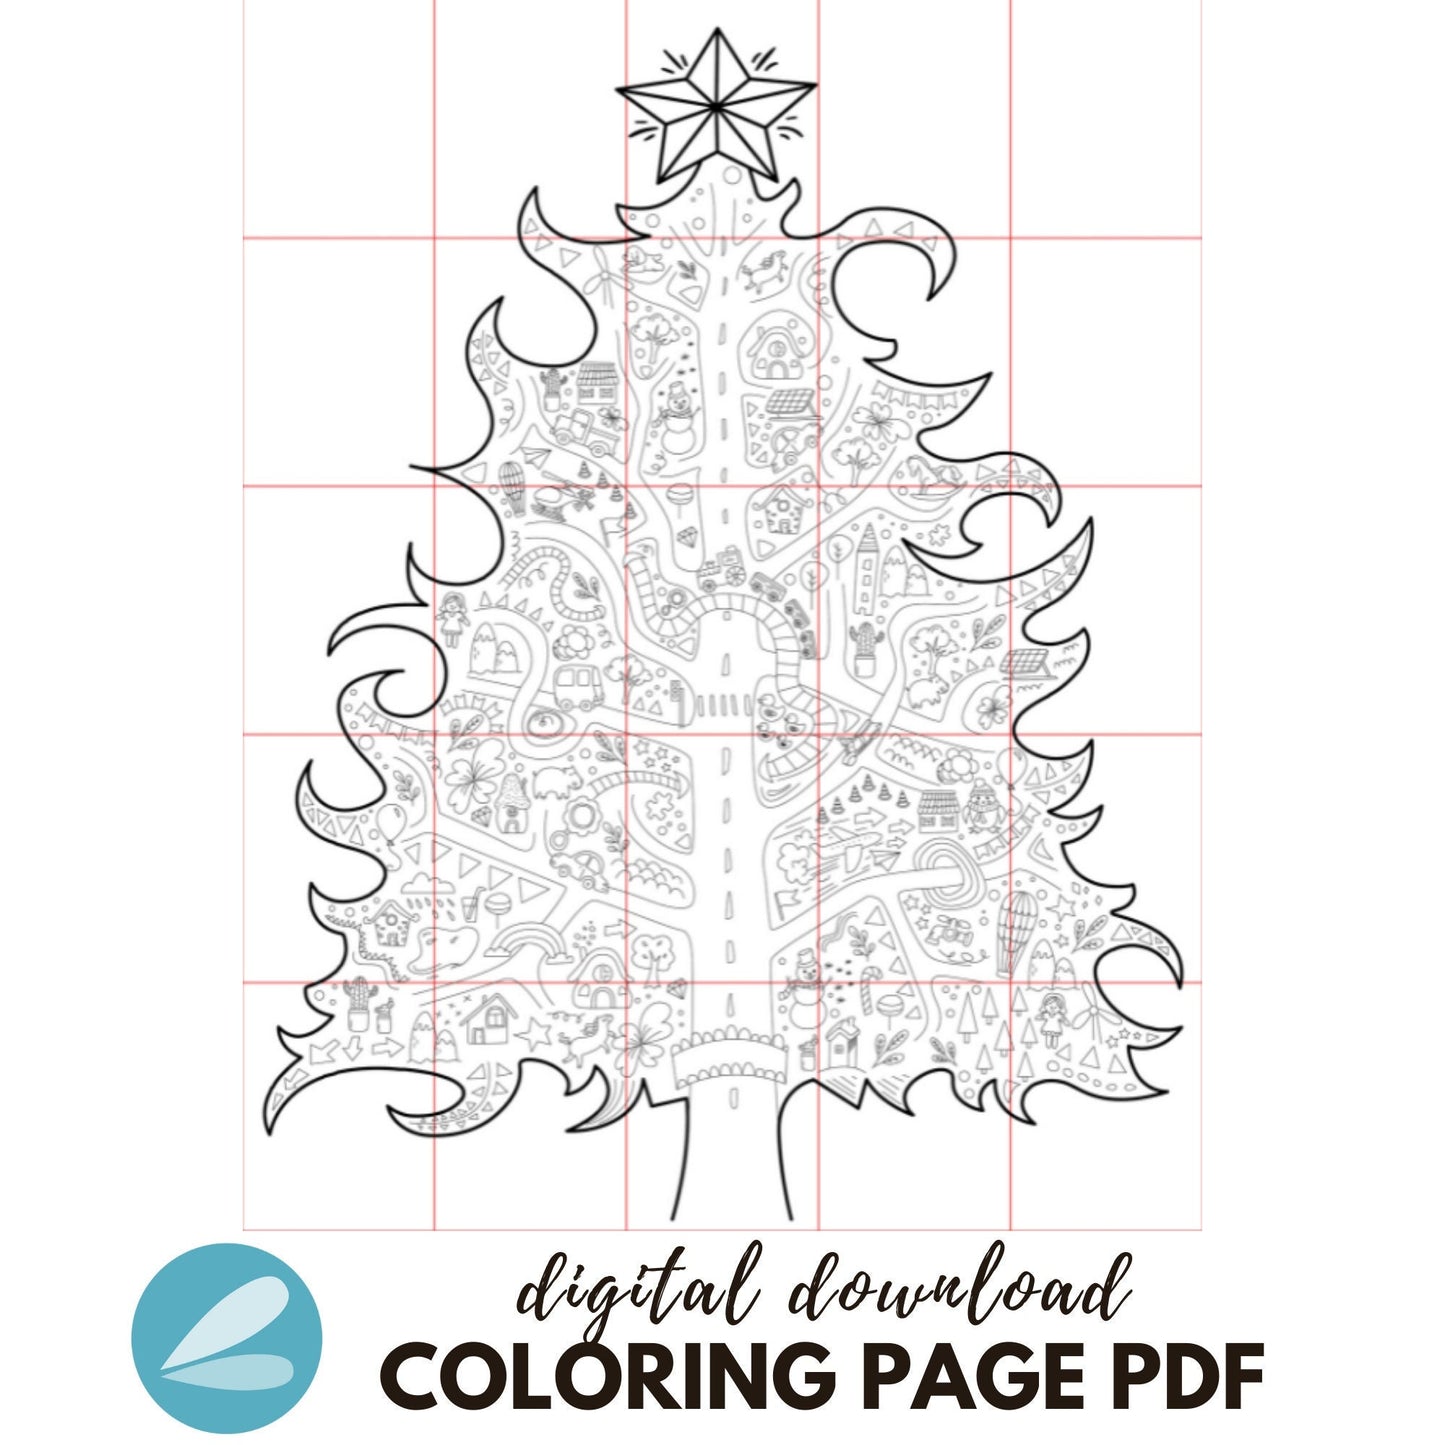 GIANT Christmas Tree Coloring Page - Christmas Tree PDF - Instant Download